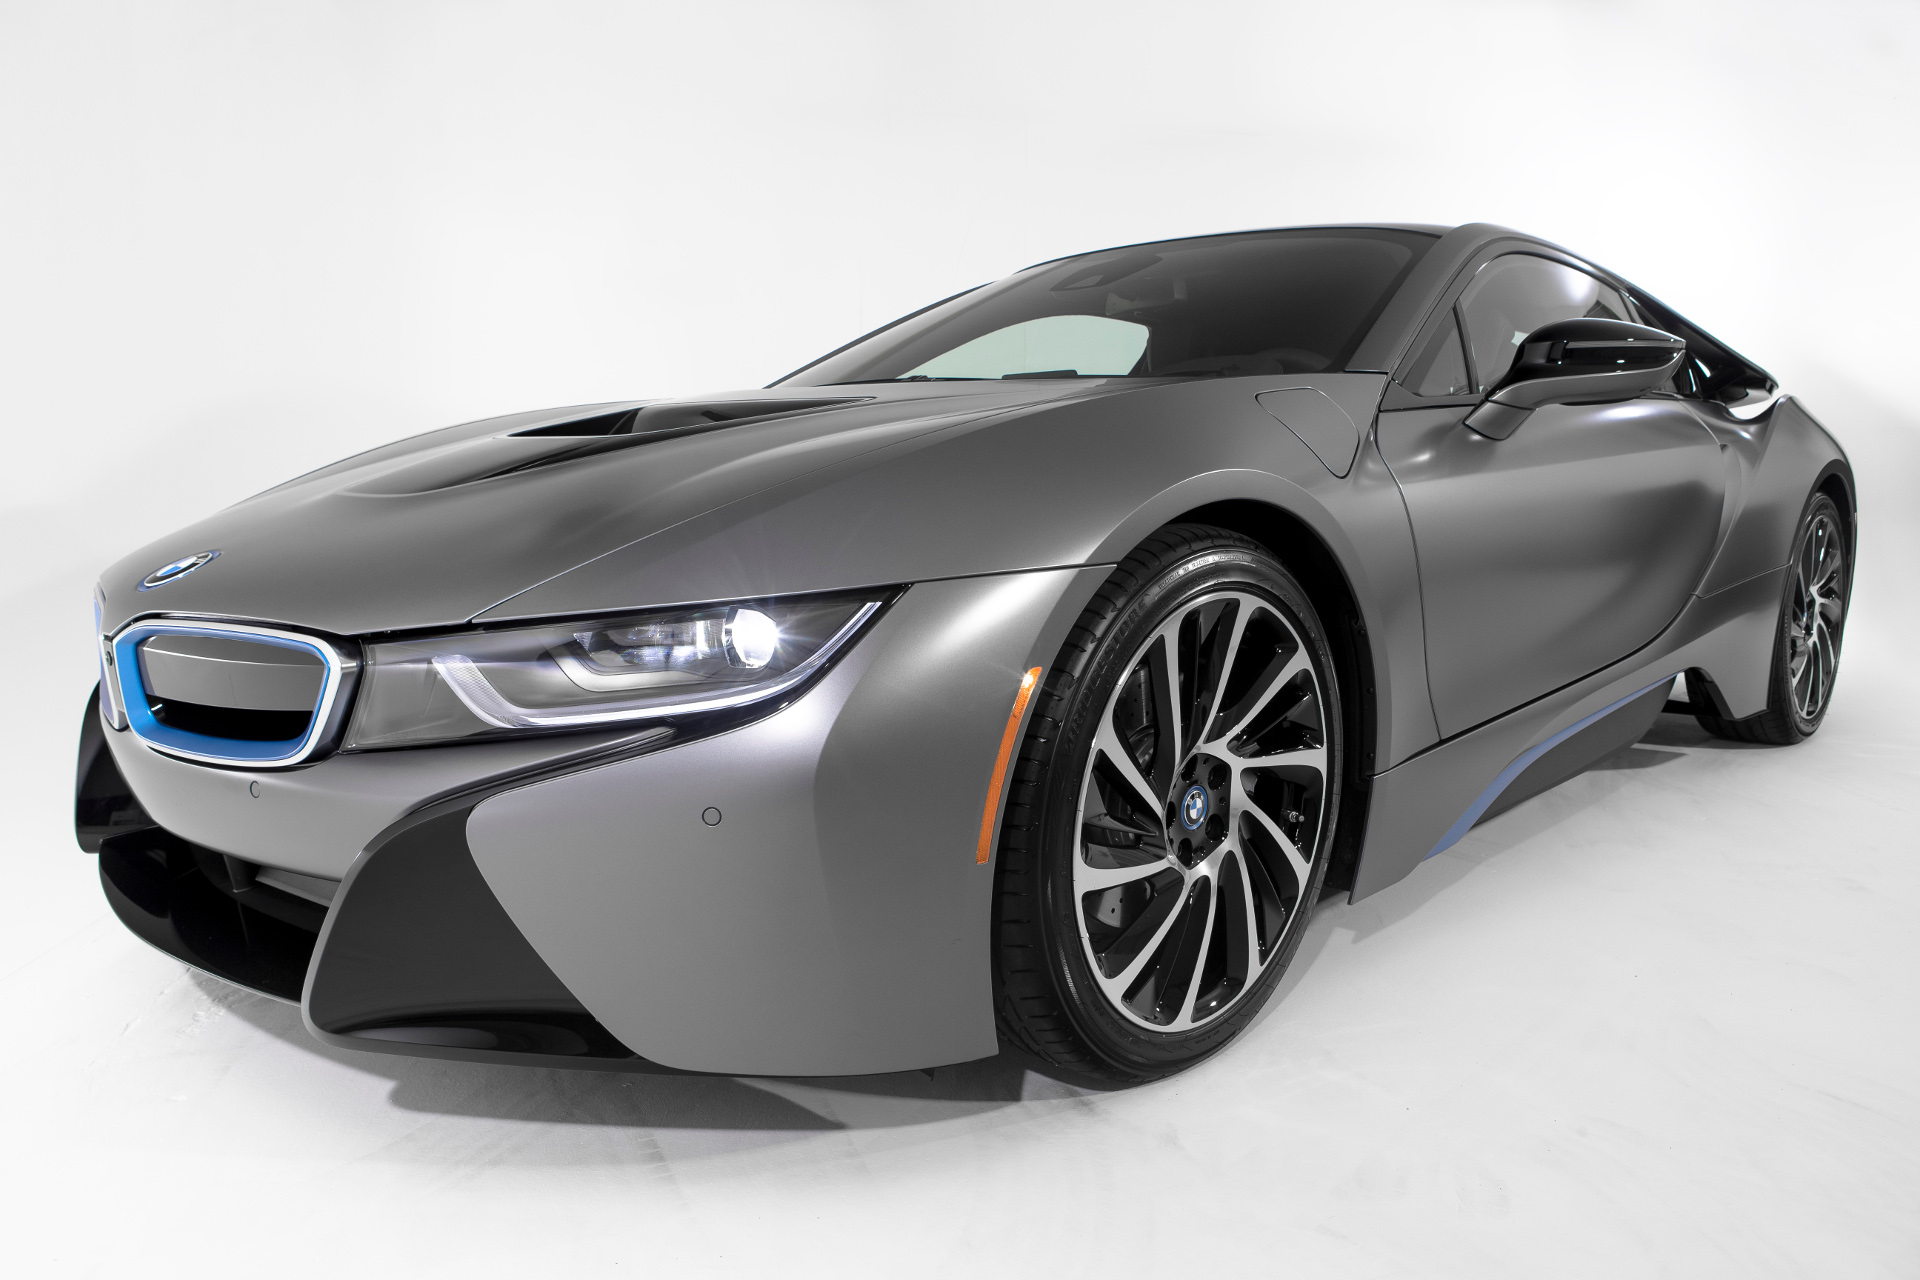 2014 BMW i8 Concours d´Elegance Edition in Frozen Grey